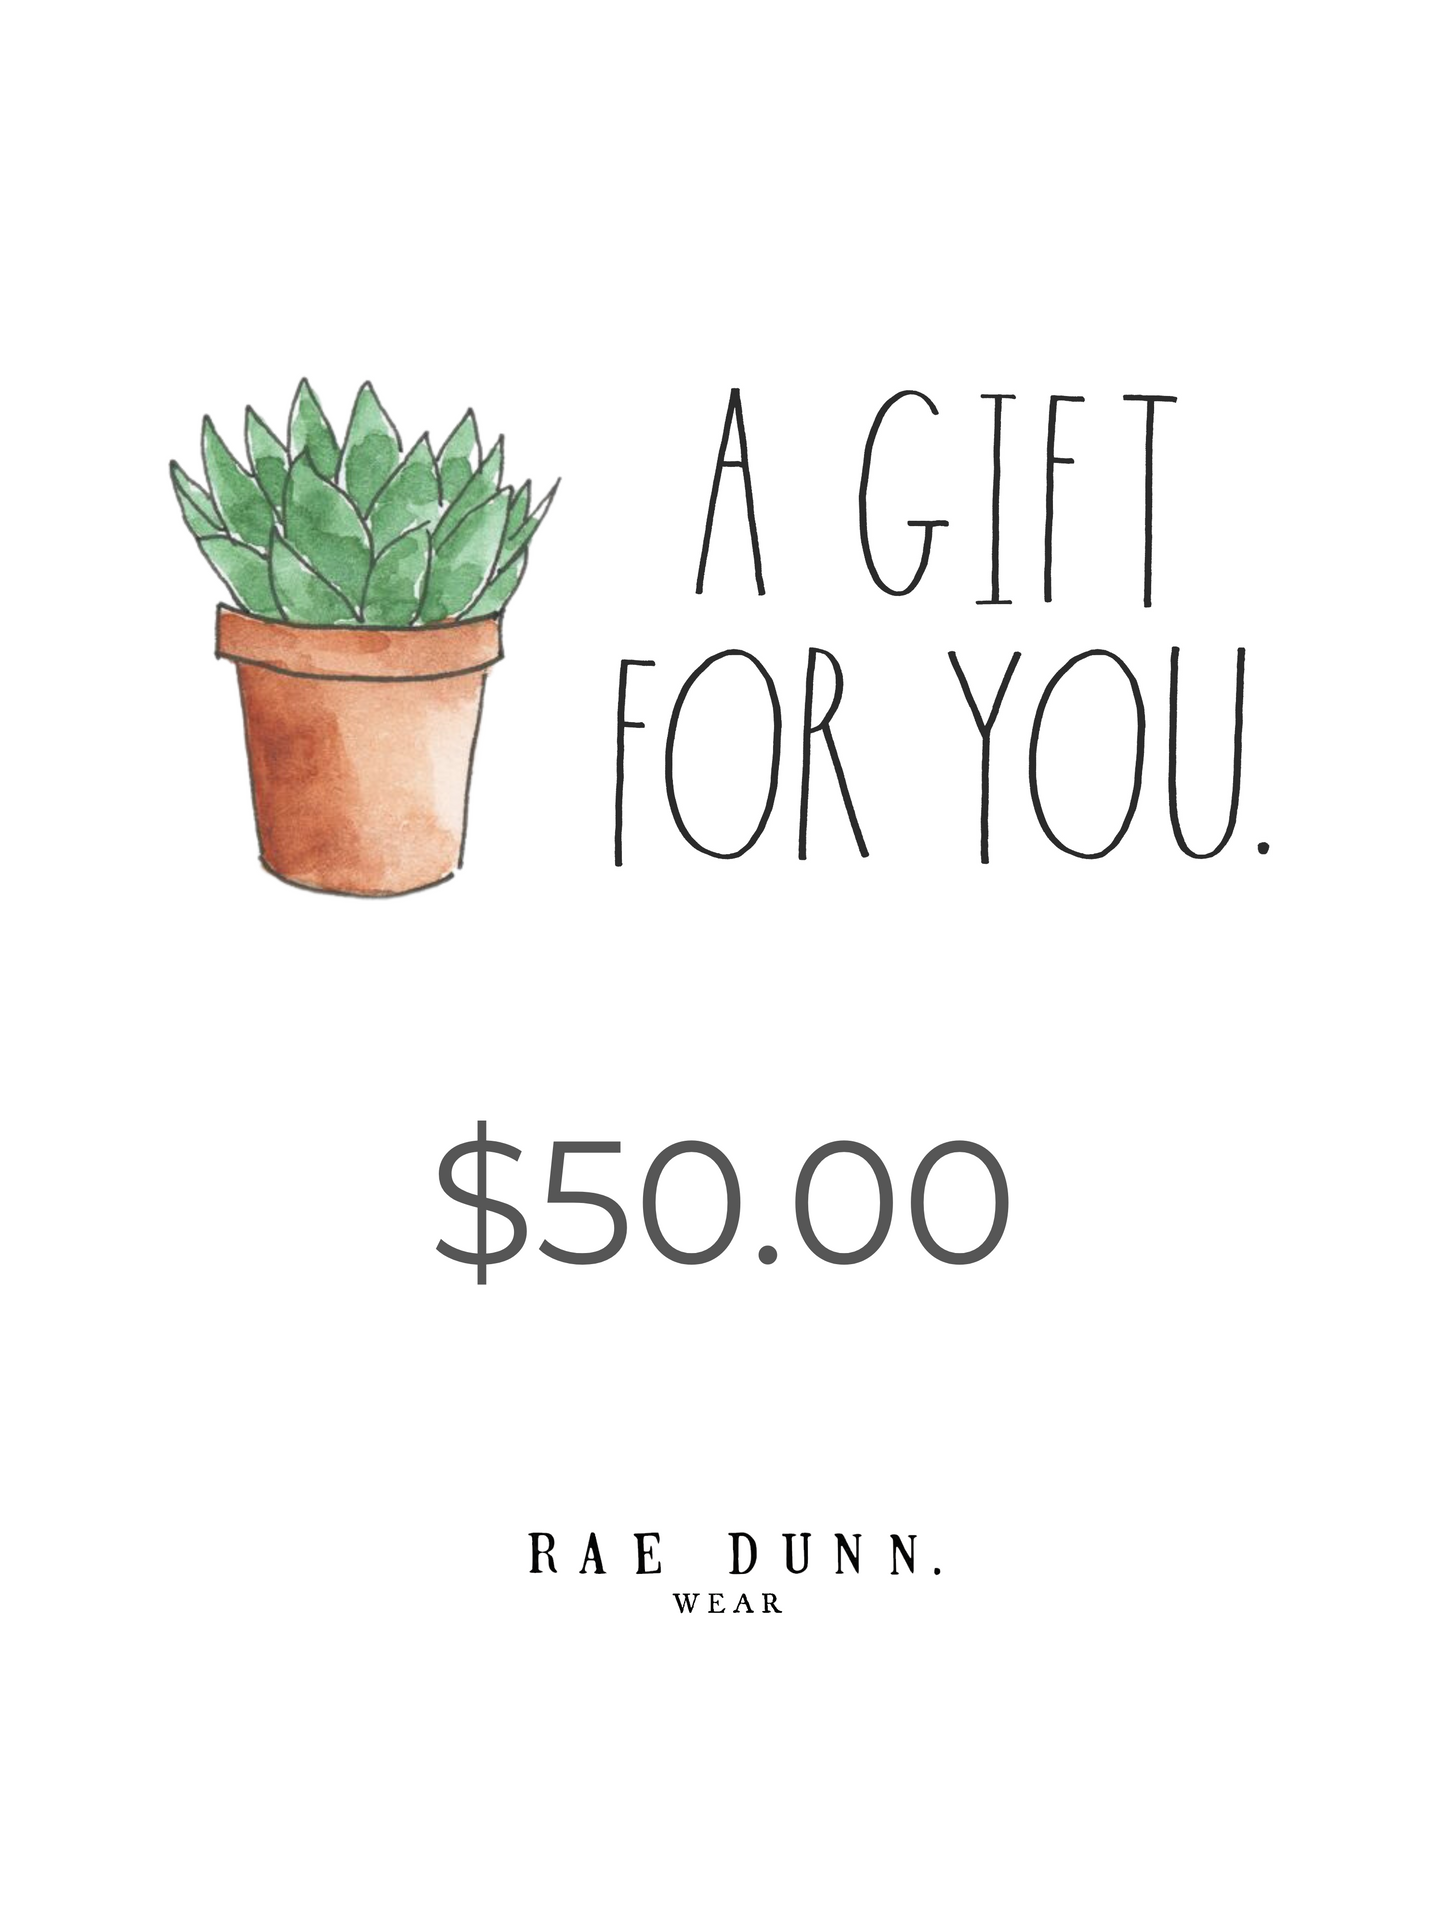 "A GIFT FOR YOU" E-Gift Card - Rae Dunn Wear - Gift Cards